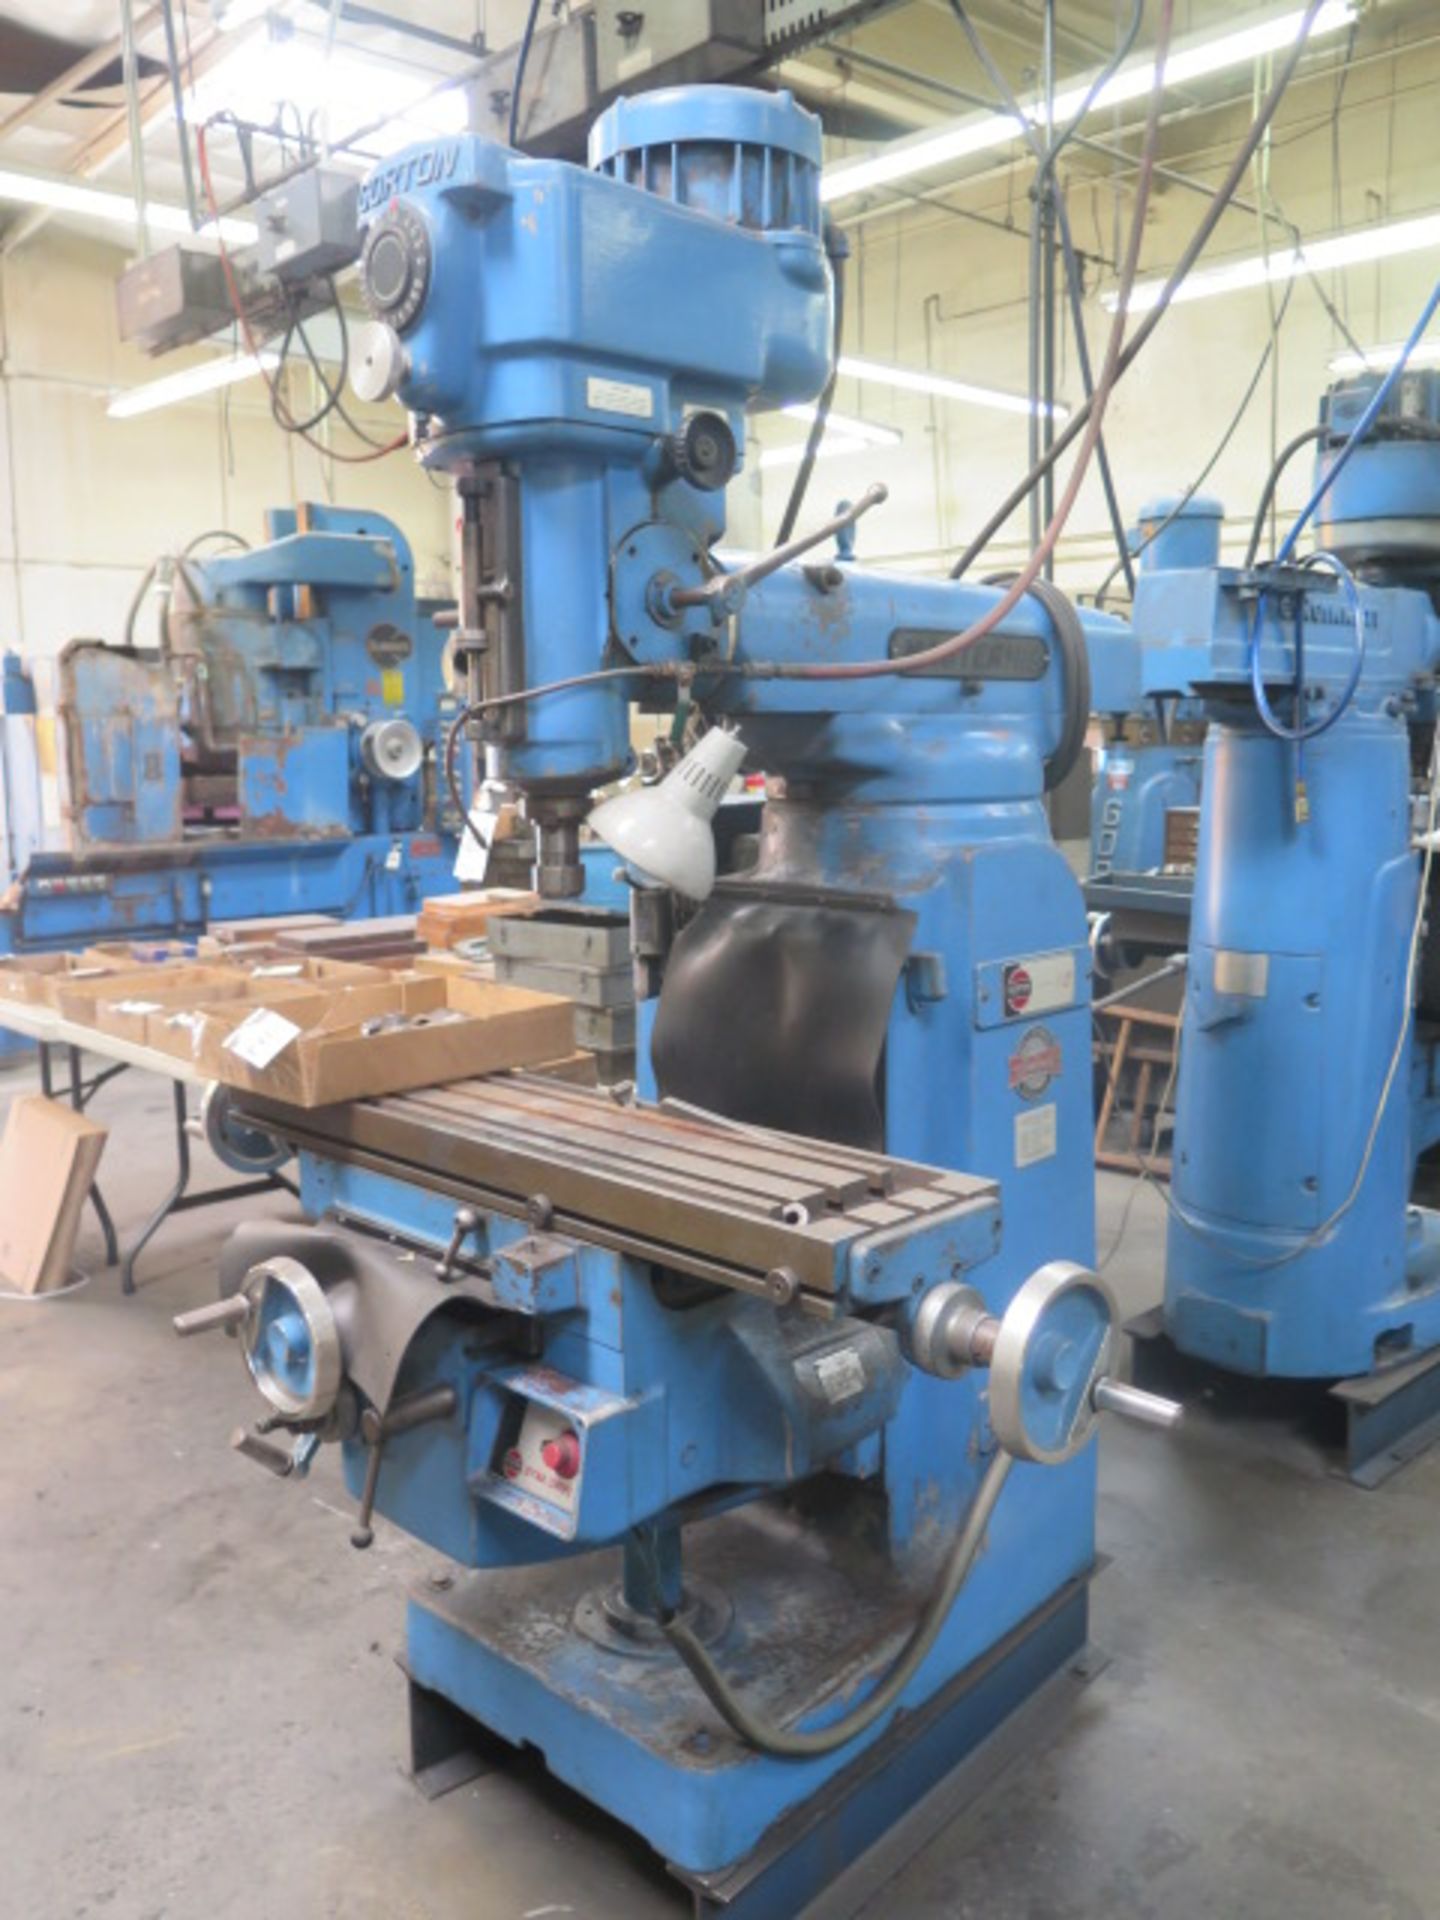 Gorton “Mastermill” mdl. 1-22 Vertical Mill w/ 650-4600 Dial Change RPM, 40-Taper Spindle, Box Ways, - Image 2 of 10